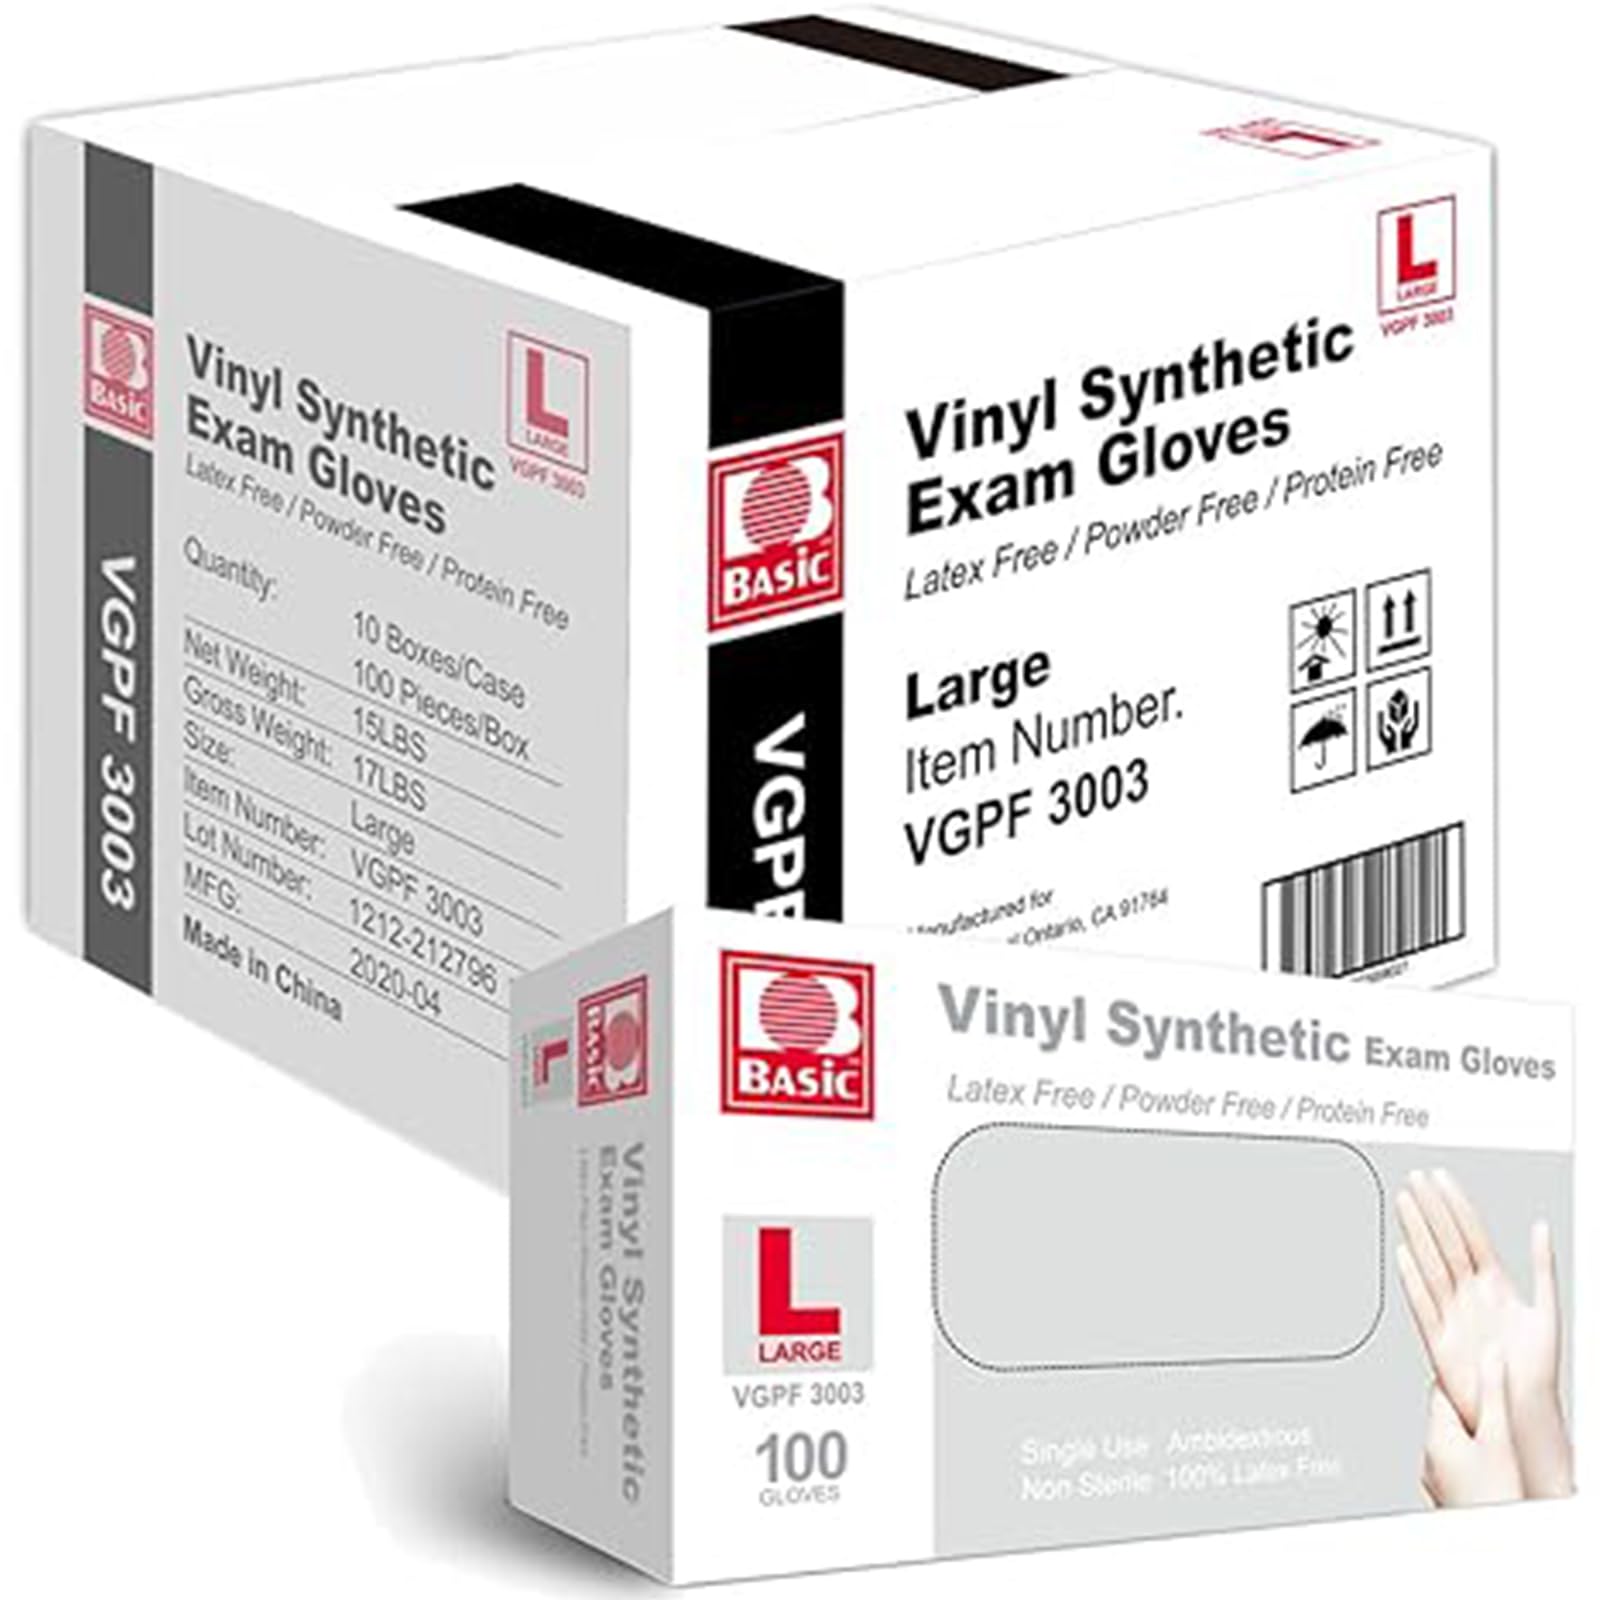 Jointown Basic Medical Clear Vinyl Exam Gloves - Latex-Free & Powder-Free - VGPF-3003 (Case of 1,000), Large